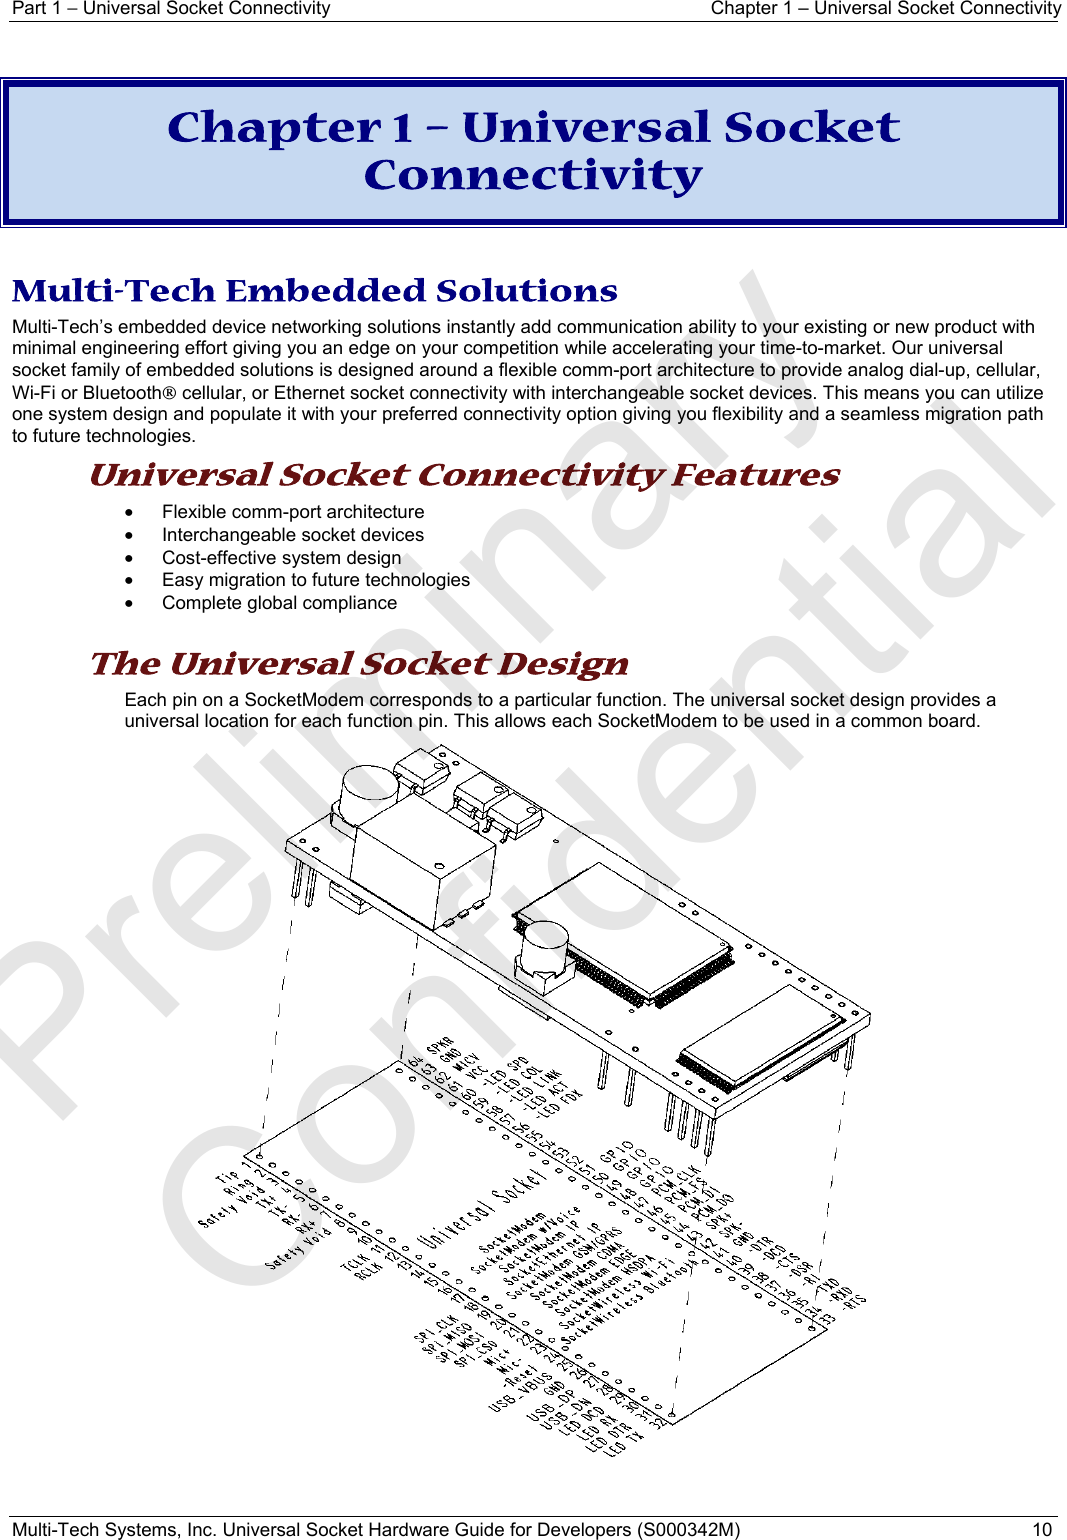 Part 1 − Universal Socket Connectivity  Chapter 1 – Universal Socket Connectivity Multi-Tech Systems, Inc. Universal Socket Hardware Guide for Developers (S000342M)  10   Chapter 1 – Universal Socket Connectivity  Multi-Tech Embedded Solutions Multi-Tech’s embedded device networking solutions instantly add communication ability to your existing or new product with minimal engineering effort giving you an edge on your competition while accelerating your time-to-market. Our universal socket family of embedded solutions is designed around a flexible comm-port architecture to provide analog dial-up, cellular, Wi-Fi or Bluetooth® cellular, or Ethernet socket connectivity with interchangeable socket devices. This means you can utilize one system design and populate it with your preferred connectivity option giving you flexibility and a seamless migration path to future technologies.  Universal Socket Connectivity Features •  Flexible comm-port architecture  •  Interchangeable socket devices • Cost-effective system design •  Easy migration to future technologies •  Complete global compliance  The Universal Socket Design  Each pin on a SocketModem corresponds to a particular function. The universal socket design provides a universal location for each function pin. This allows each SocketModem to be used in a common board.   Preliminary  Confidential